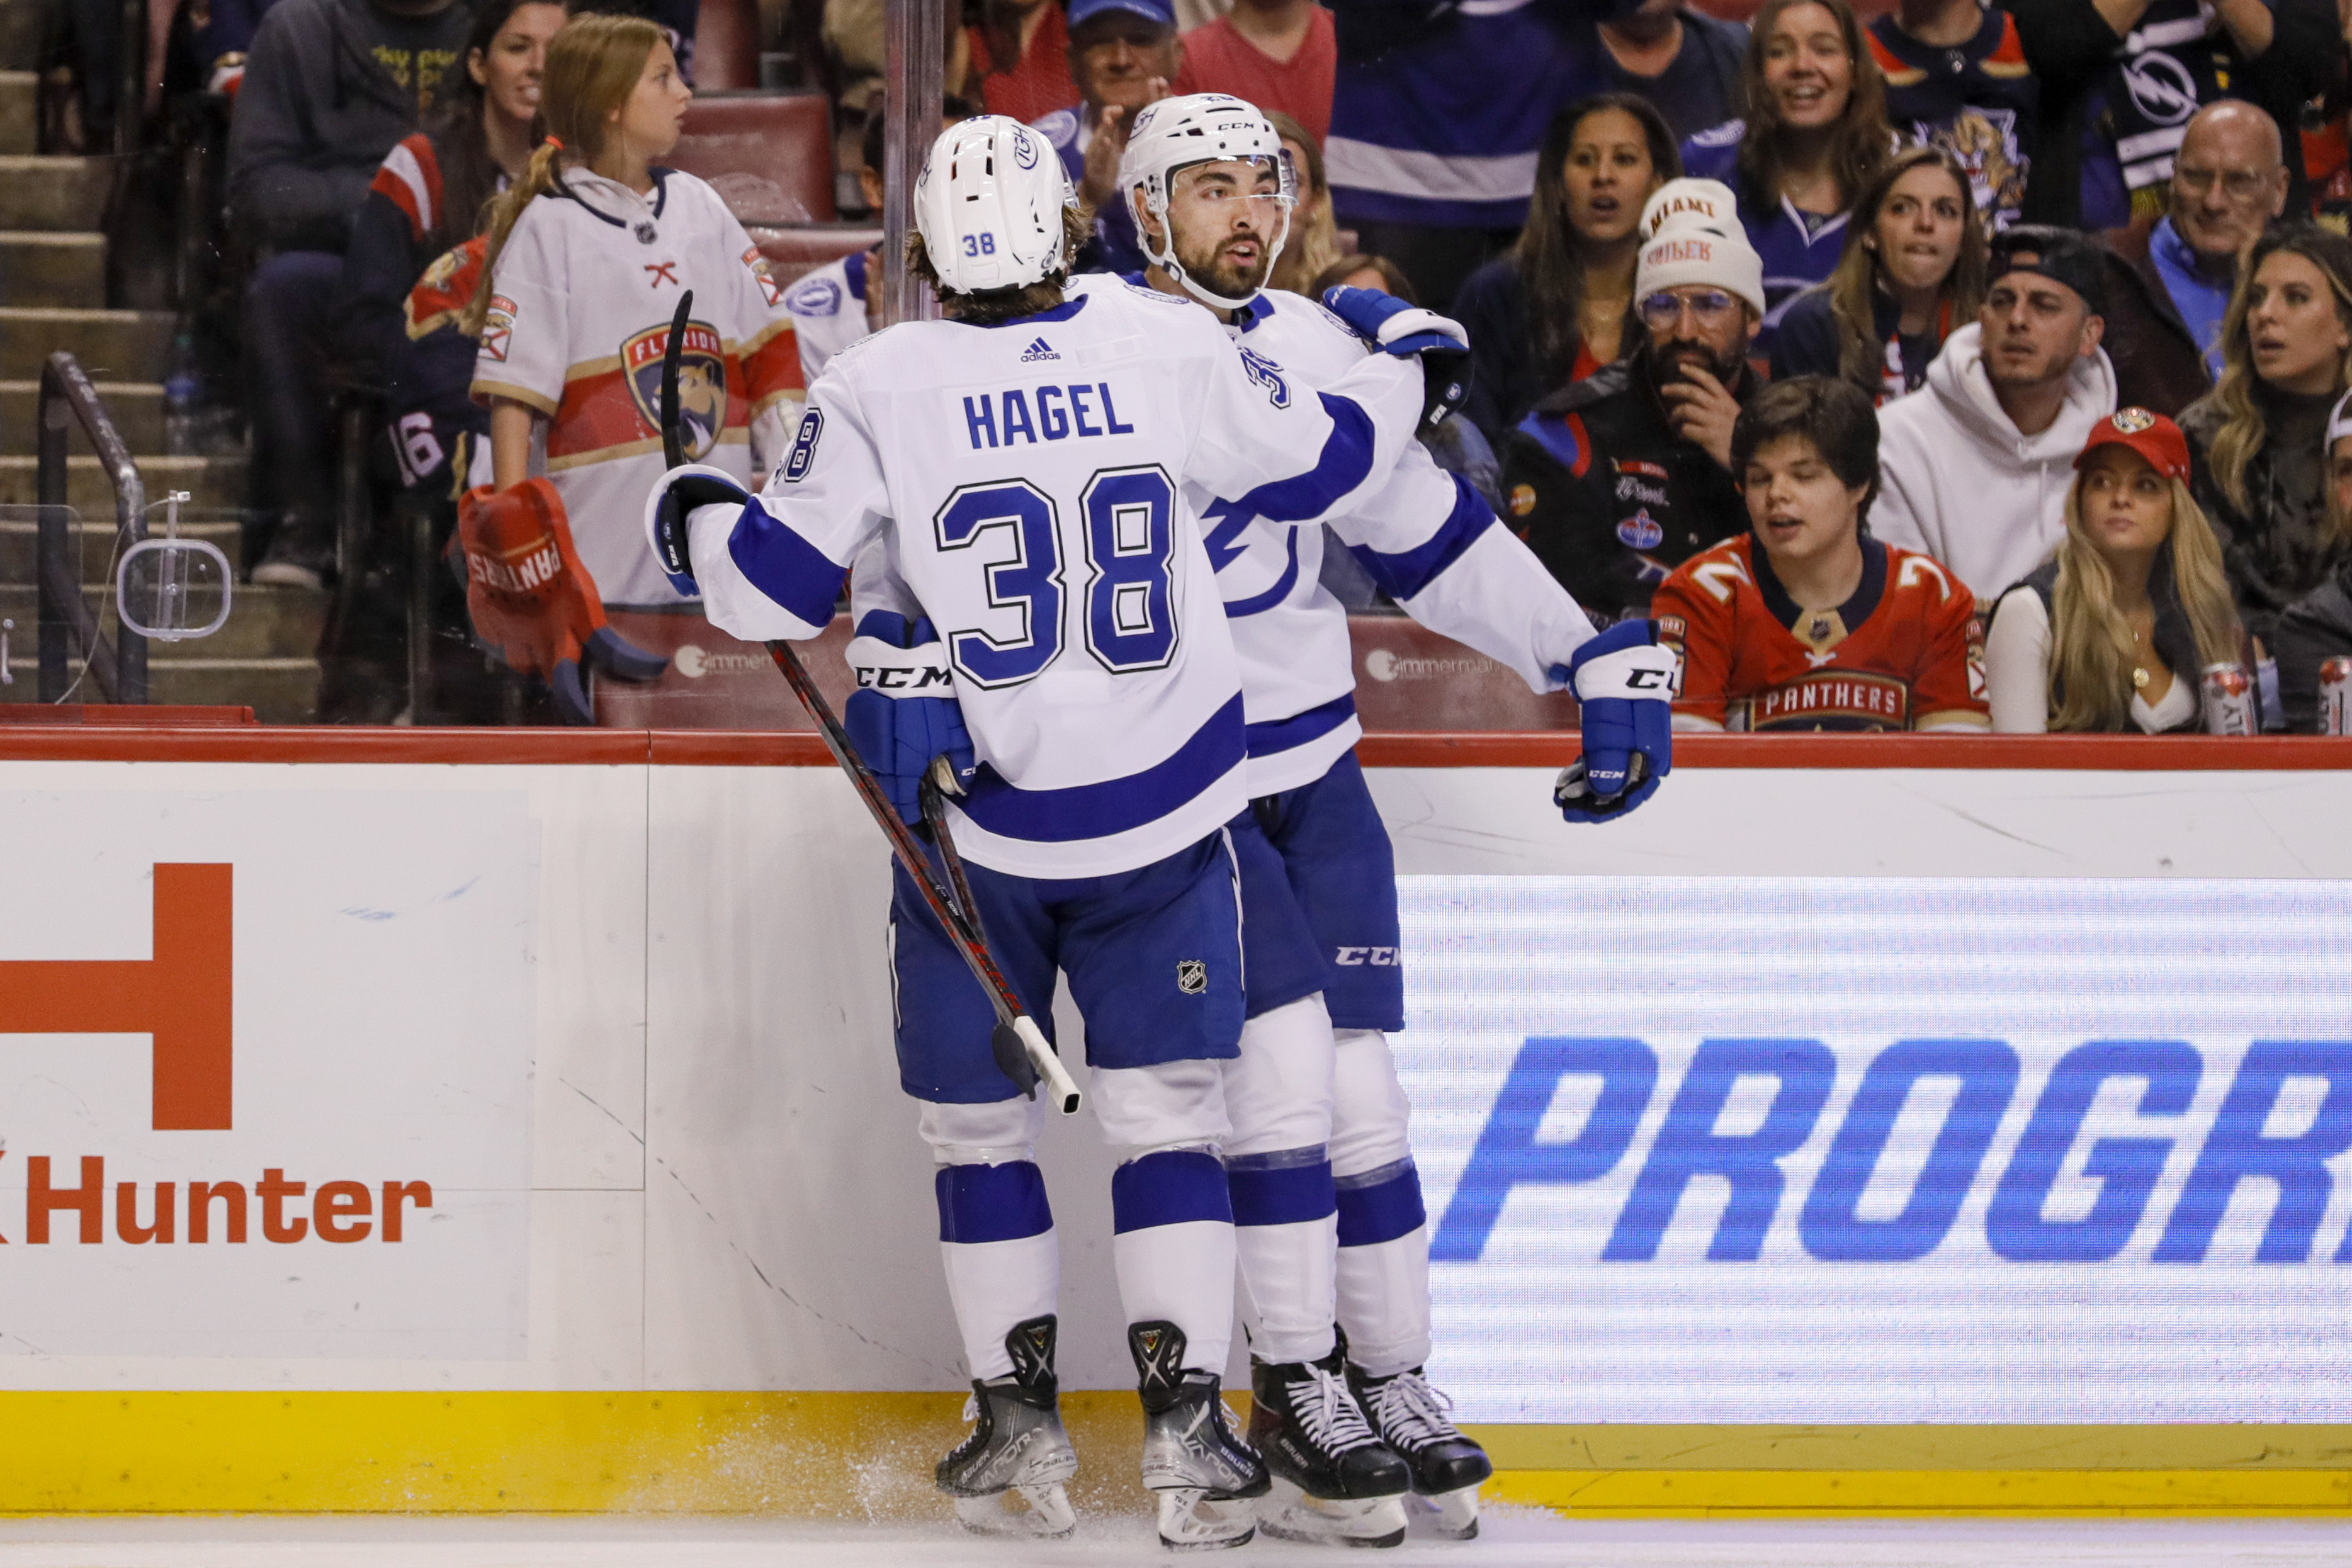 Lightning strike first against Panthers, win 4-1 in Game 1